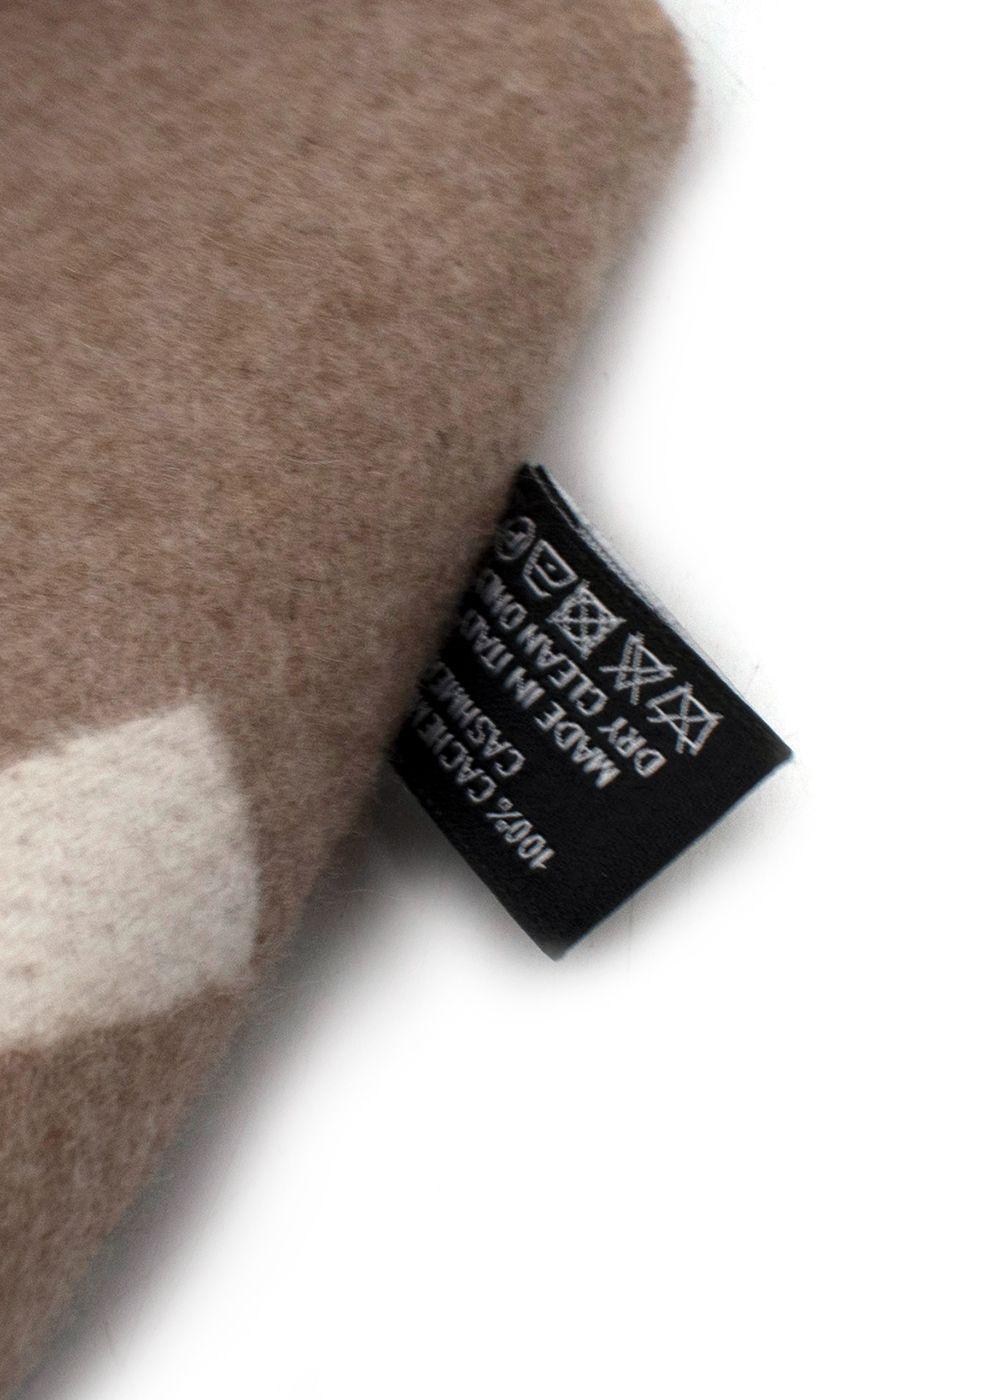 
Chanel CC Reversible Beige and Brown Cashmere Shawl
Can be used as a cape or throw

Width: 68cm
Length: 215cm

- Mid-weight, soft cashmere
- Large interlocking CC logo 
- Chanel logo edge
- Lightly fringed edges 

Materials:
100% Cashmere

